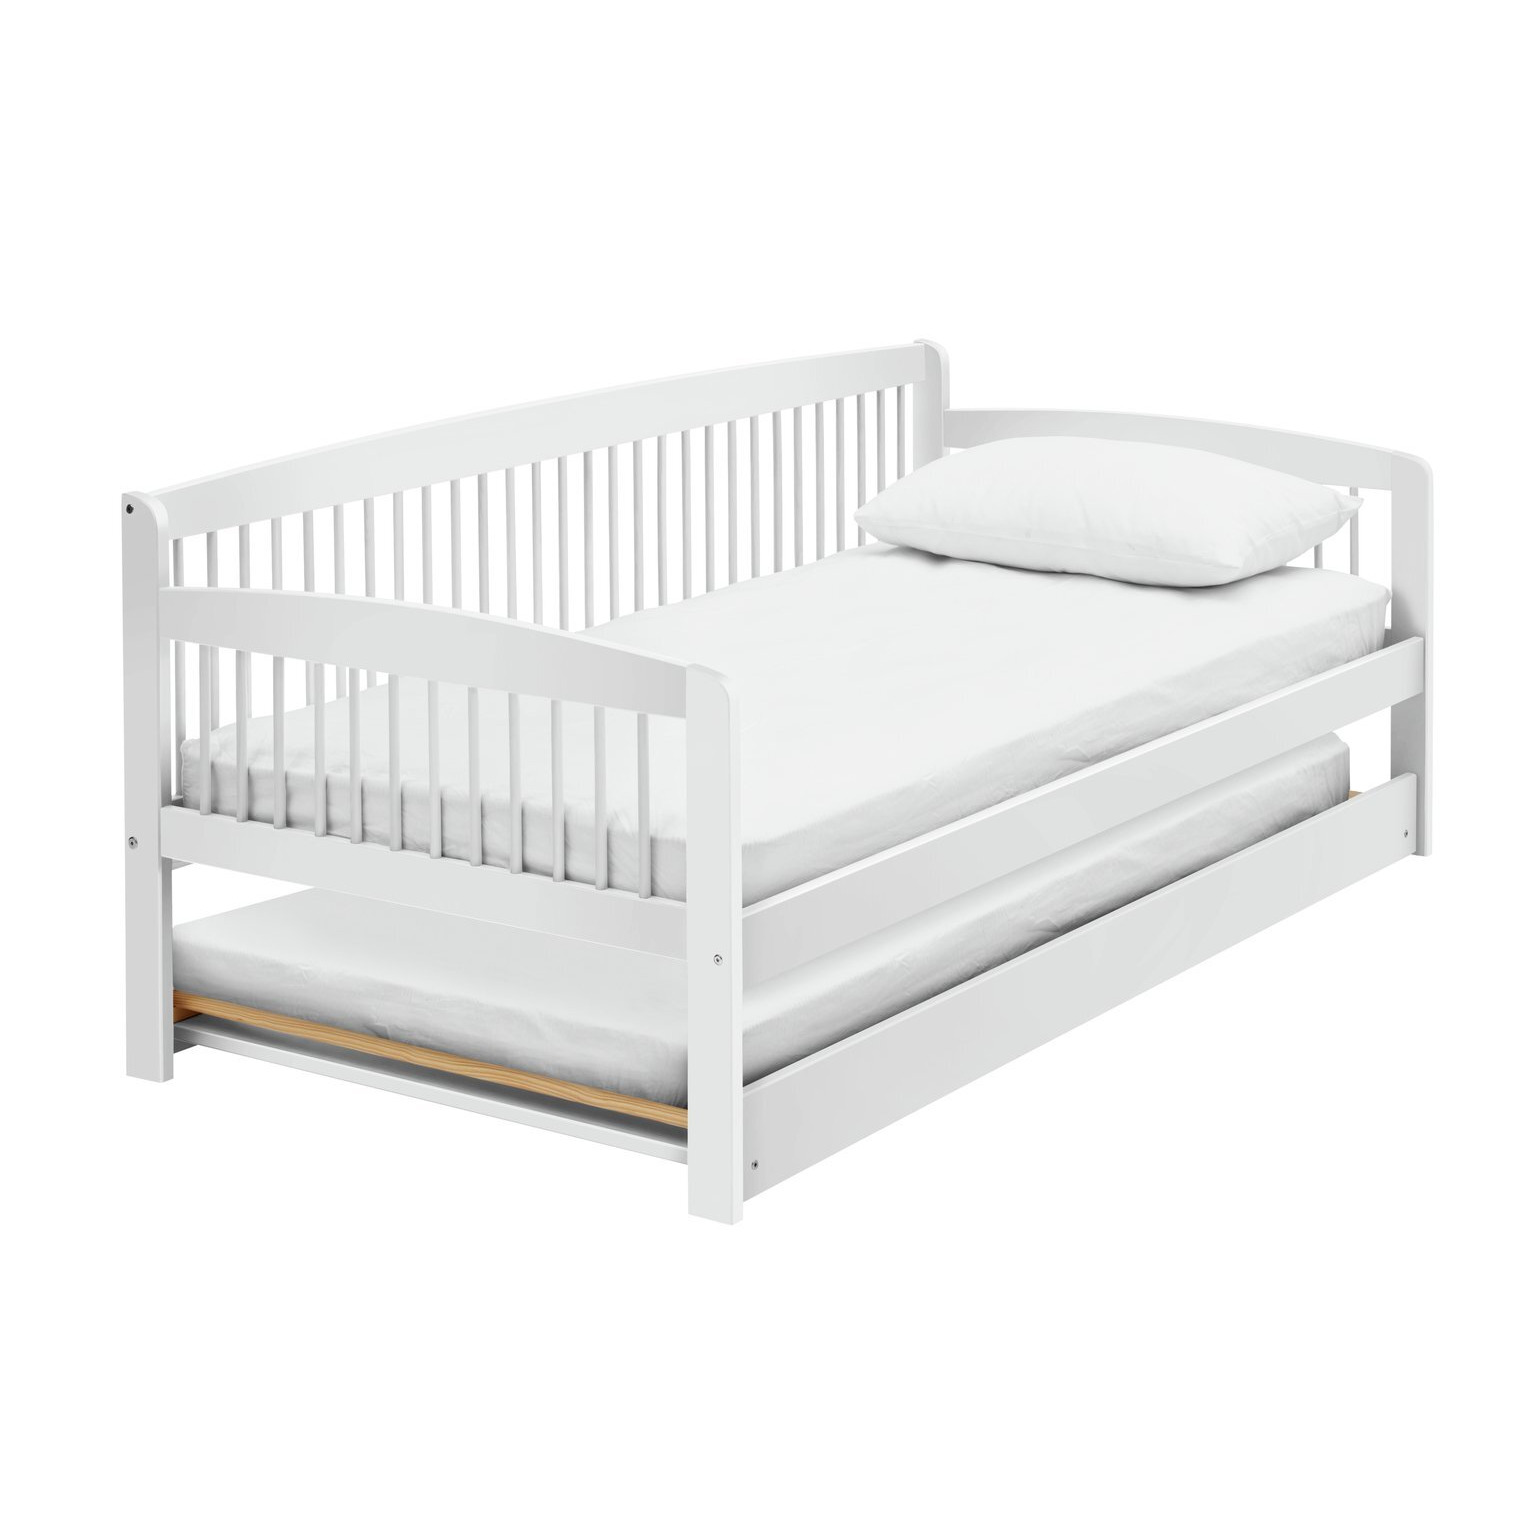 Argos Home Andover Day Bed, Trundle and 2 Mattresses - White - image 1